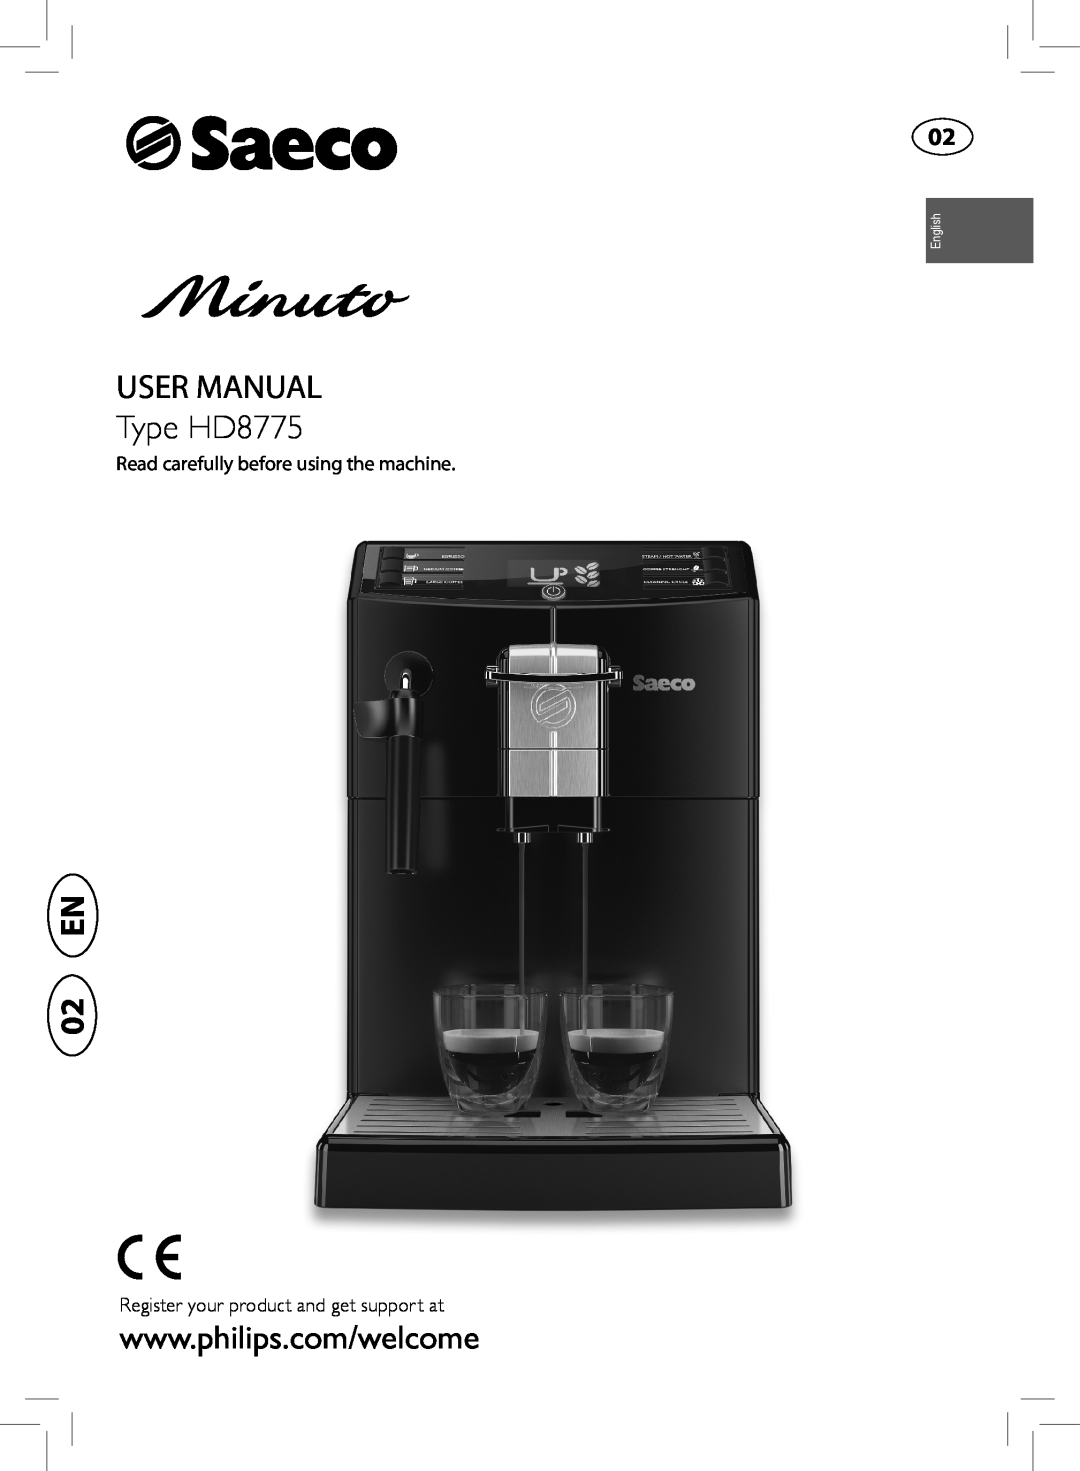 Saeco Coffee Makers HD8775 user manual 02 EN, Read carefully before using the machine, English 